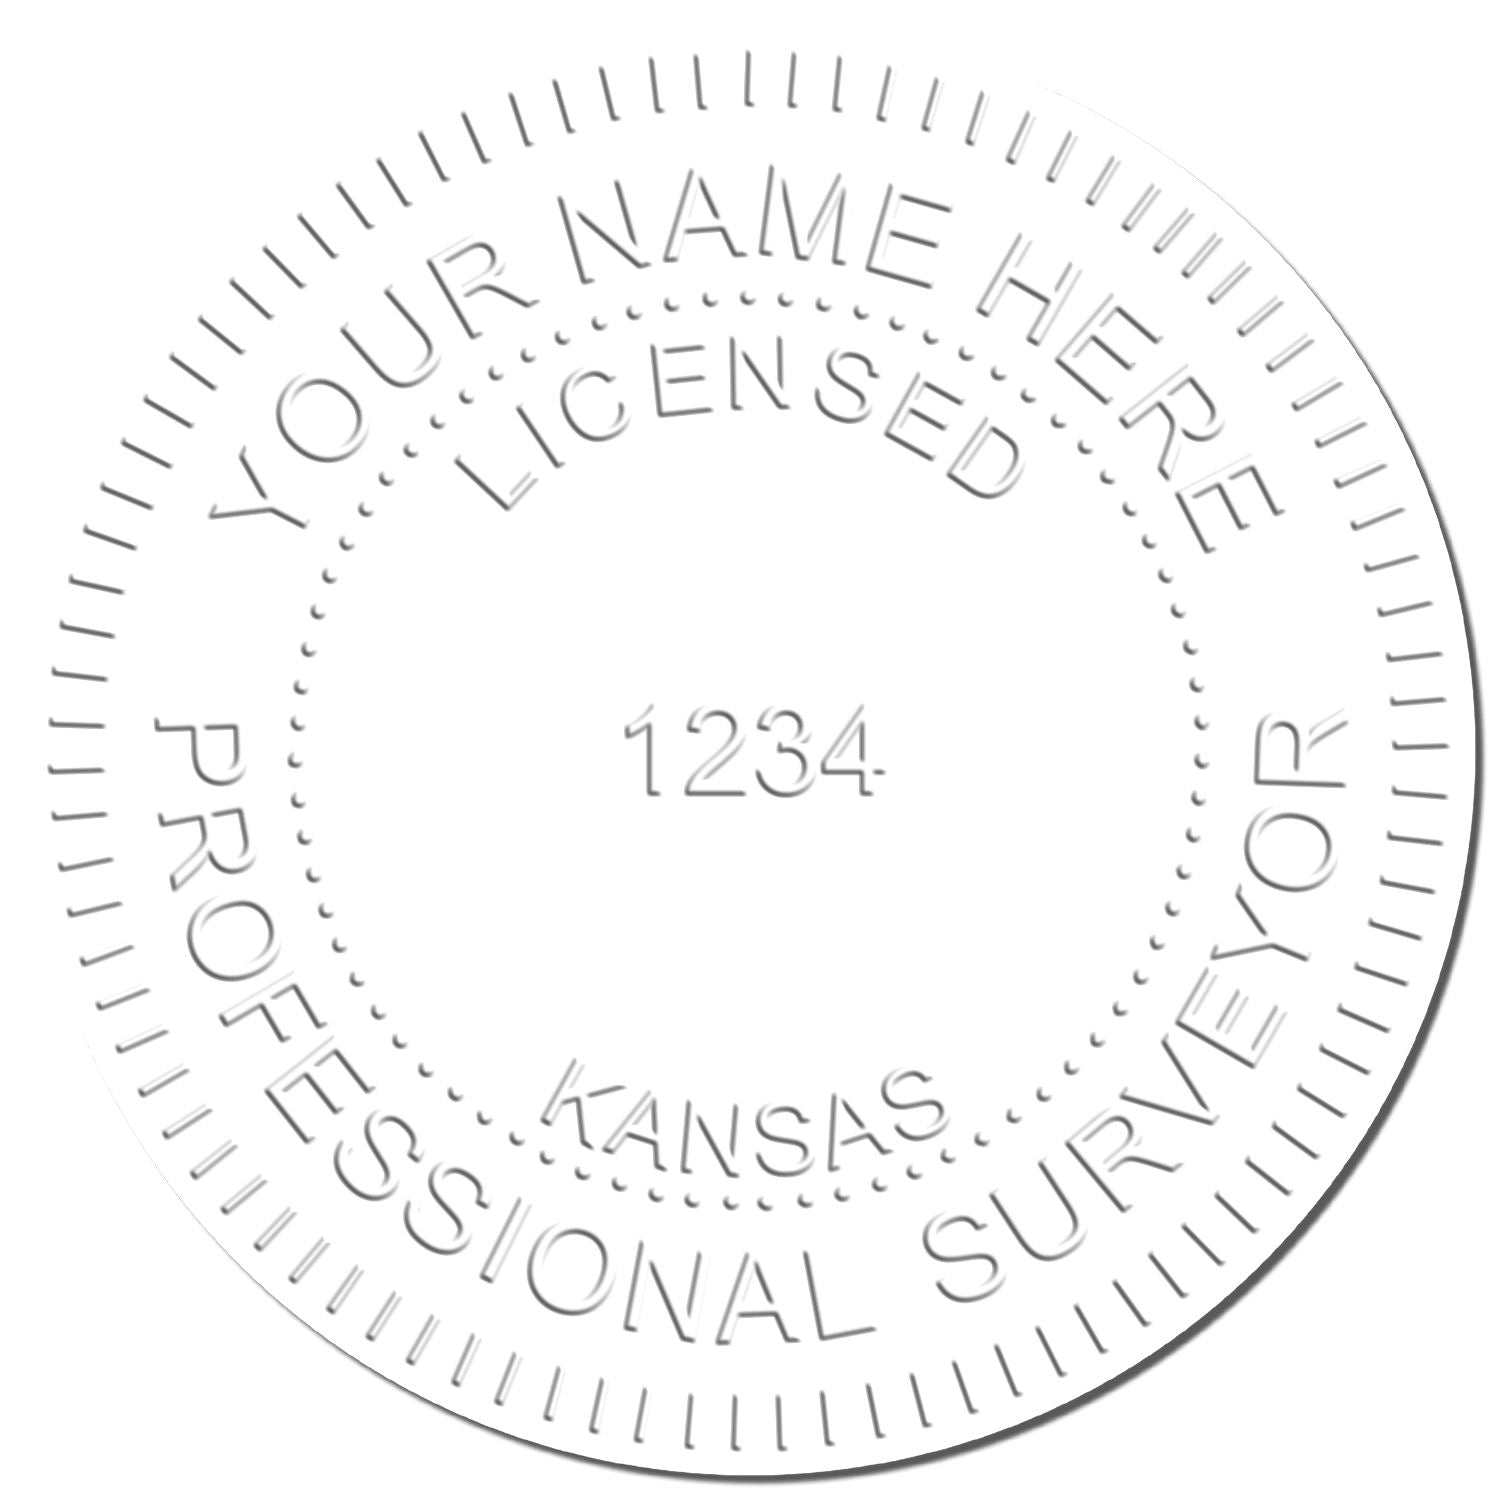 The main image for the Long Reach Kansas Land Surveyor Seal depicting a sample of the imprint and electronic files